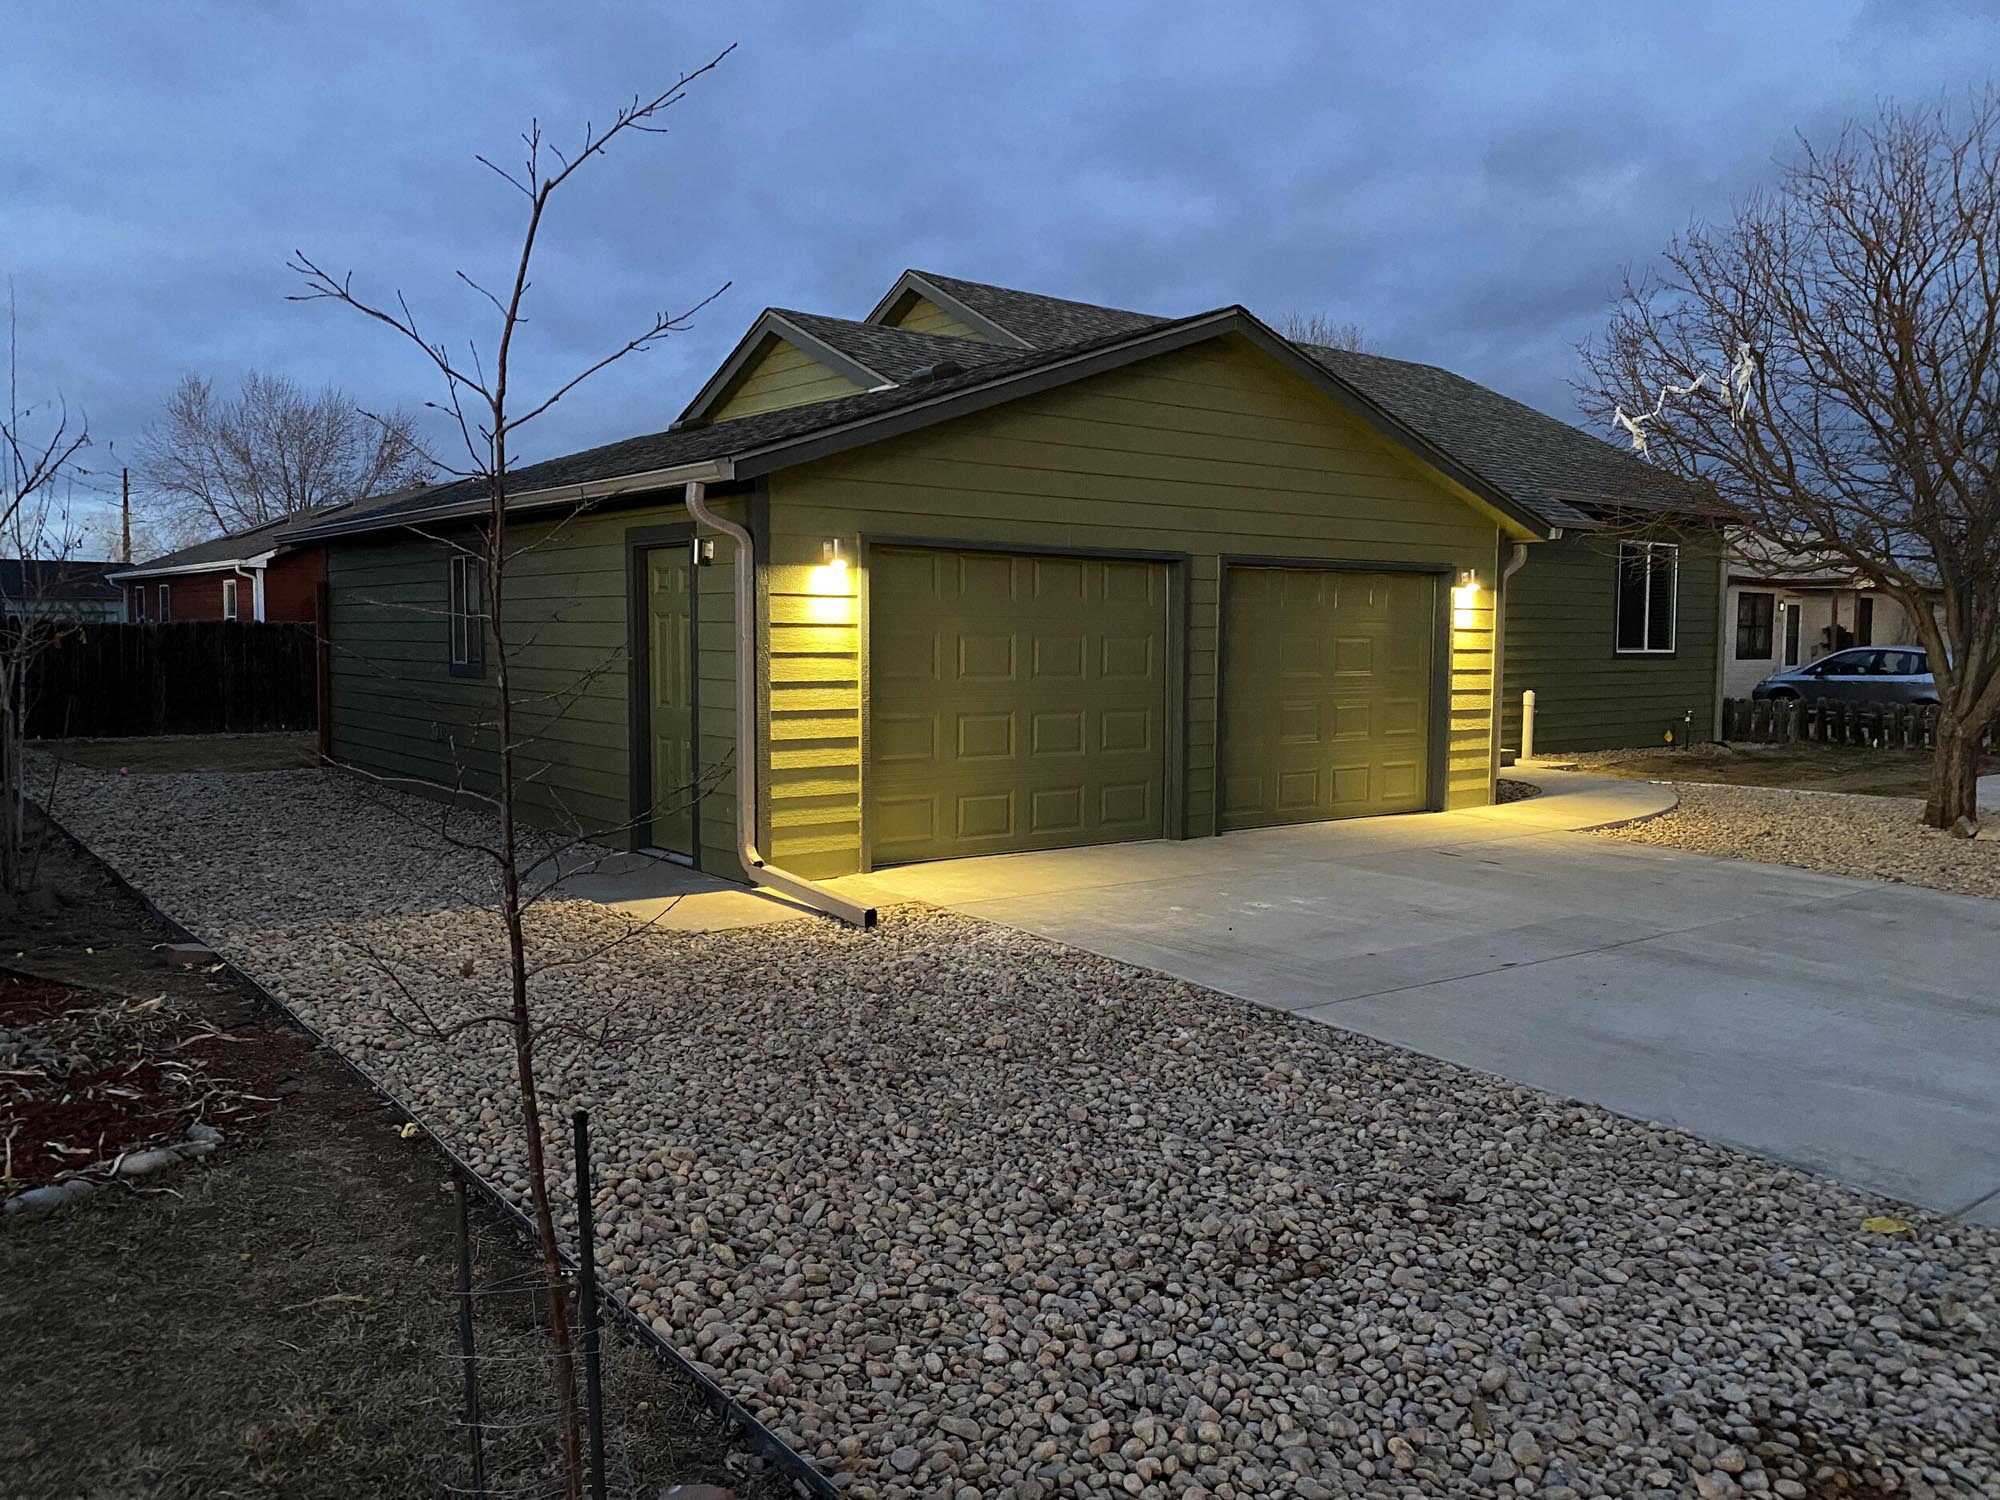 Corner view of a two-car garage with green siding and lights at night